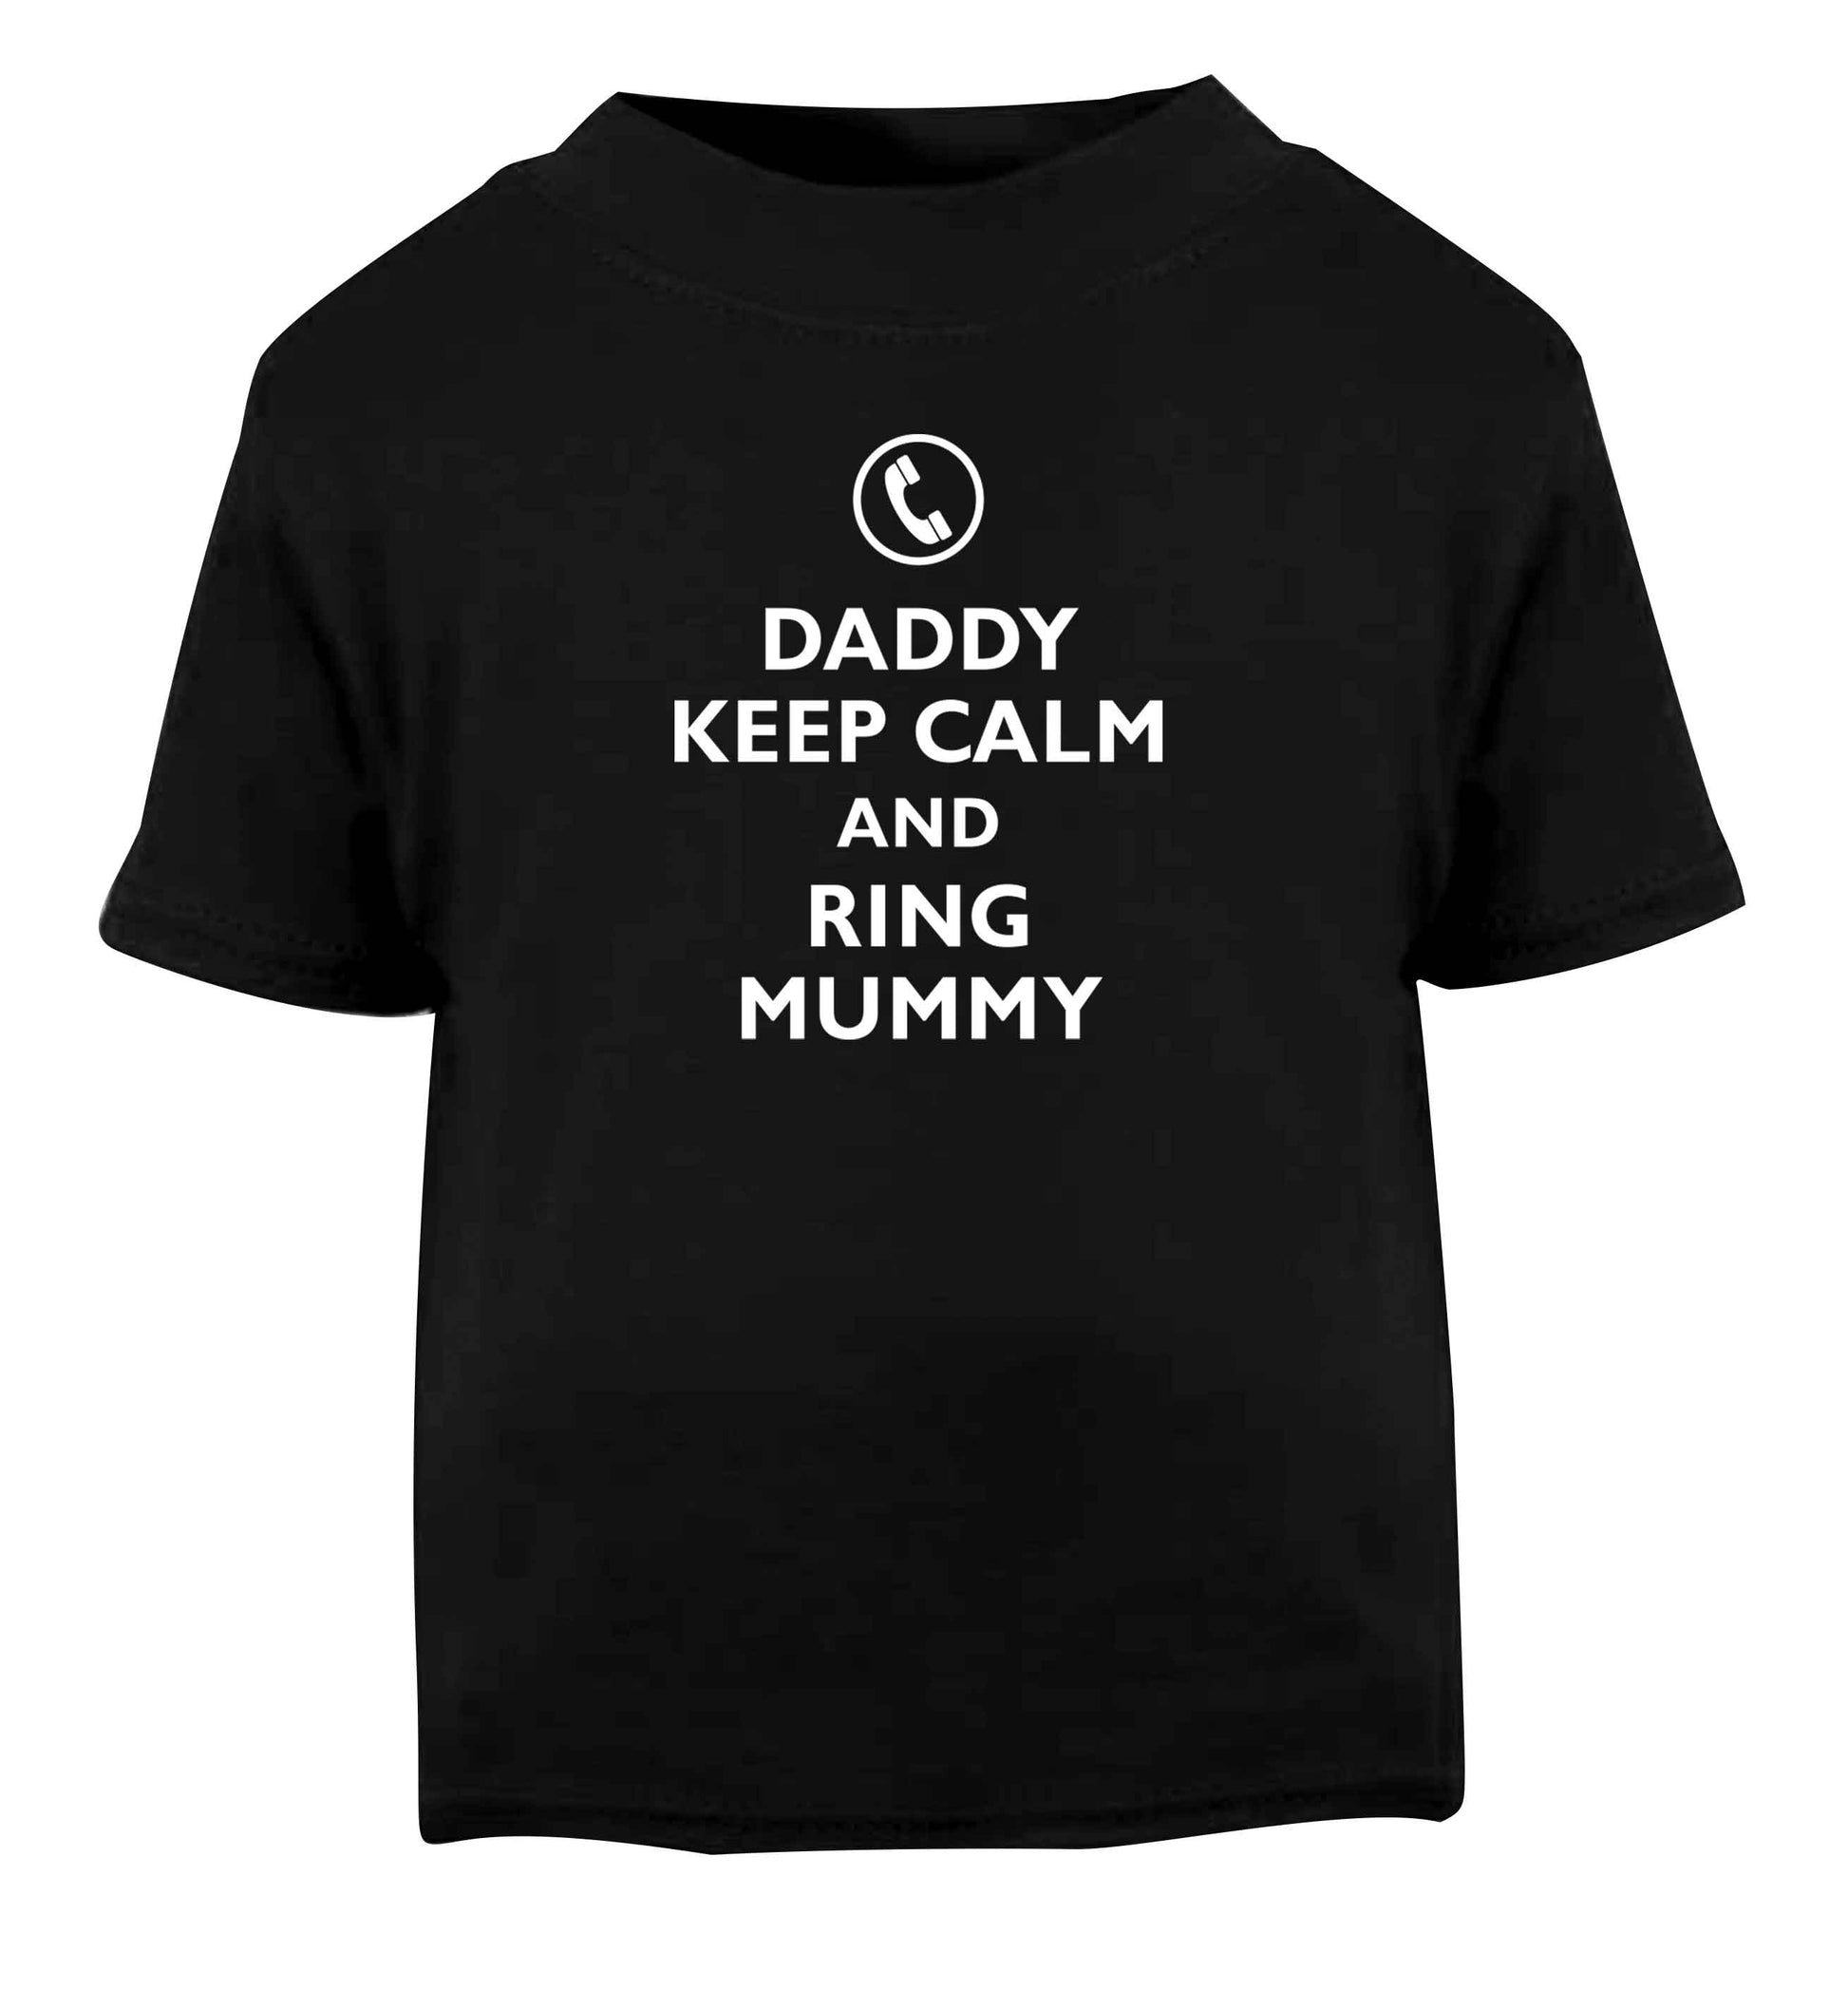 Daddy keep calm and ring mummy Black baby toddler Tshirt 2 years